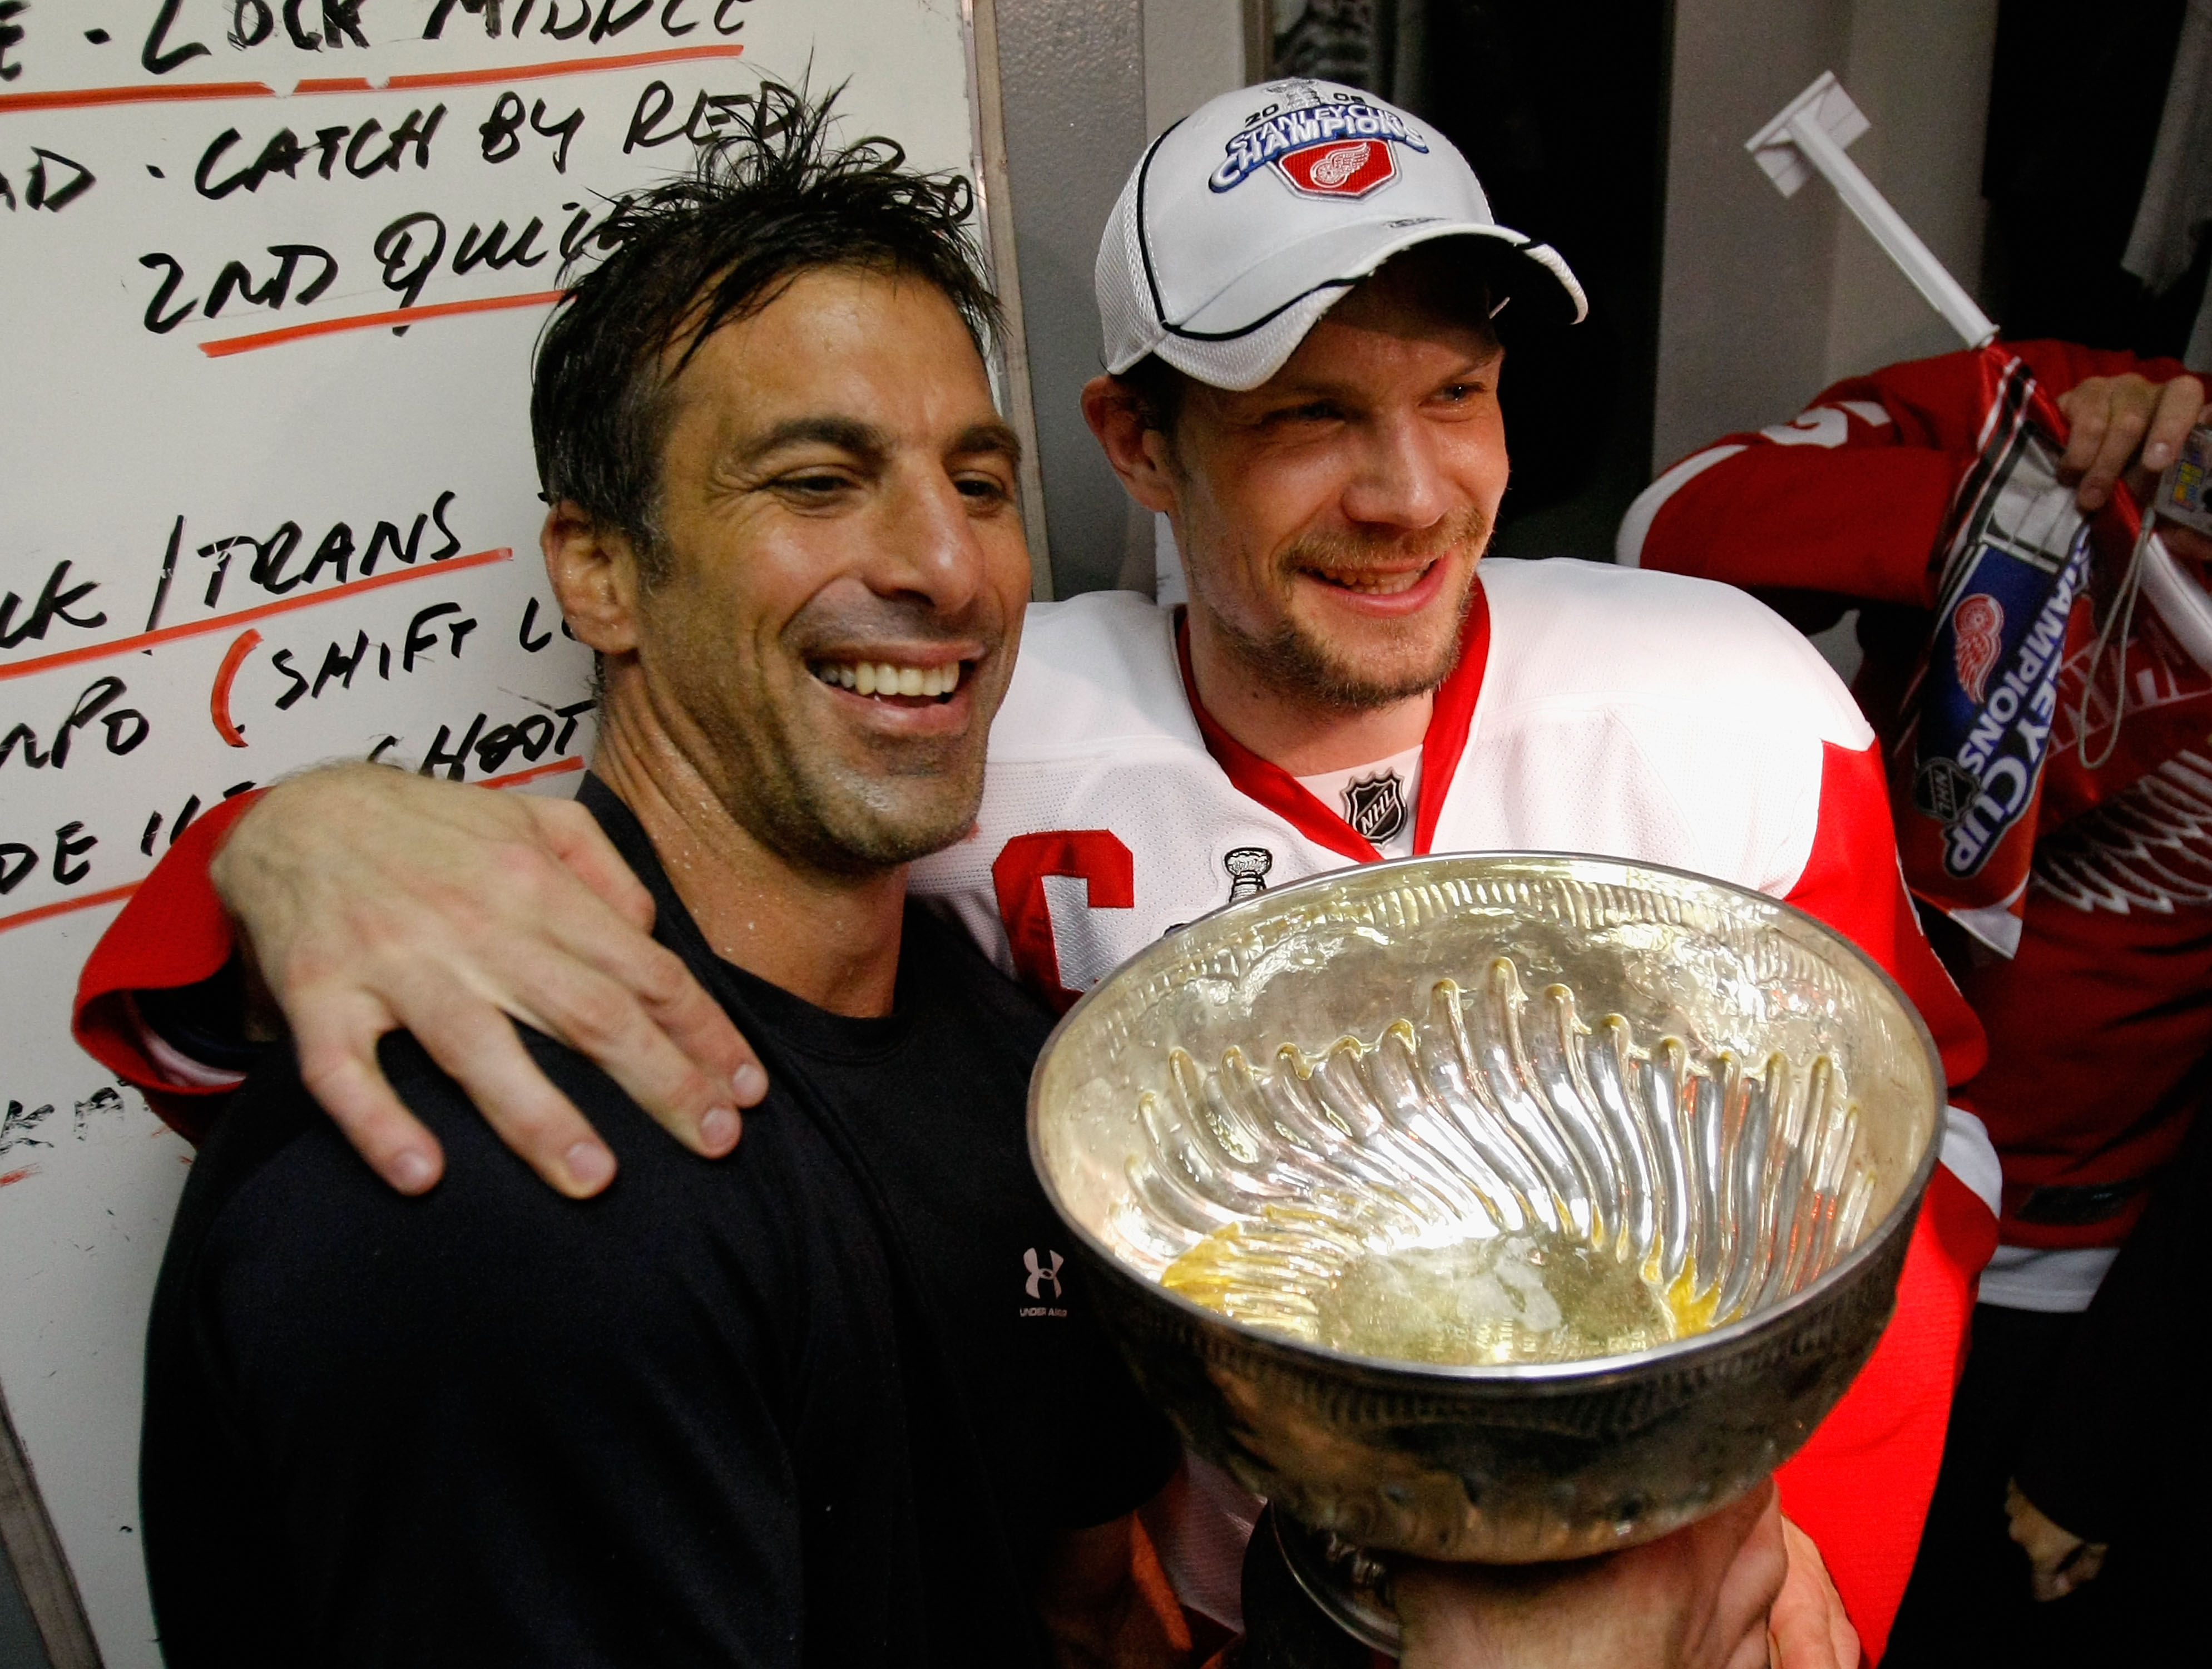 PITTSBURGH - JUNE 04:  Chris Chelios and Nicklas Lidstrom of the Detroit Red Wings celebrate with the Stanley Cup in the locker room after defeating the Pittsburgh Penguins in game six of the 2008 NHL Stanley Cup Finals at Mellon Arena on June 4, 2008 in